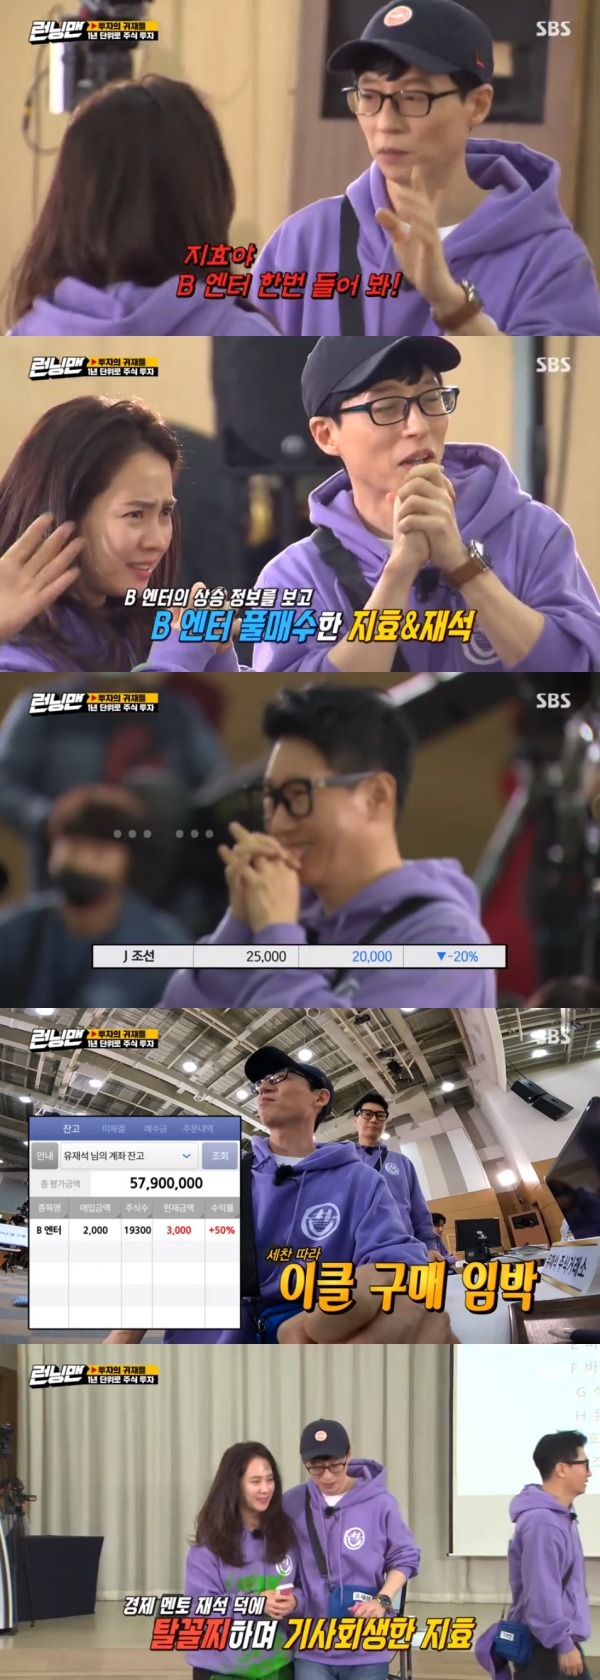 Seoul = = Song Ji-hyo is out of bottom thanks to Yoo Jae-SukOn the 28th, SBS Running Man was held at the running simulated stock investment competition.On this day, Yang Se-chan decided to share information with Lee Kwang-soo.Lee Kwang-soo promised to ask about J Joseon but failed to abandon the fuss and confirmed I chemistry.Ji Suk-jin said he would give Lee Kwang-soo 500,000 won if he gave J Chosun information.Lee Kwang-soo received 500,000 won and gave me fake information of the best of the dances.Jeon So-min was recommended for the event by the camera director, who said he was stocking among the staff; the camera director recommended C IT to Jeon So-min.Song Ji-hyo heard B Andreu Buenafuente Phase 2 information; B Andreu Buenafuente had a strong share price.Yoo Jae-Suk and Song Ji-hyo concentrated their entire fortune on B Andreu Buenafuente.Ji Suk-jin, who had been watching J Chosun from the beginning, bought J Chosun.B Andreu Buenafuente, who invested with Yoo Jae-Suk and Song Ji-hyo, rose 50 percent; the two held hands tight and cheered.Yang Se-chan, who maintained F bio, also made the investment; Yoo Jae-Suk hit Yang Se-chan by about 16 million won.Song Ji-hyo was out of bottom thanks to Yoo Jae-Suk, who said, Thanks to my brother.